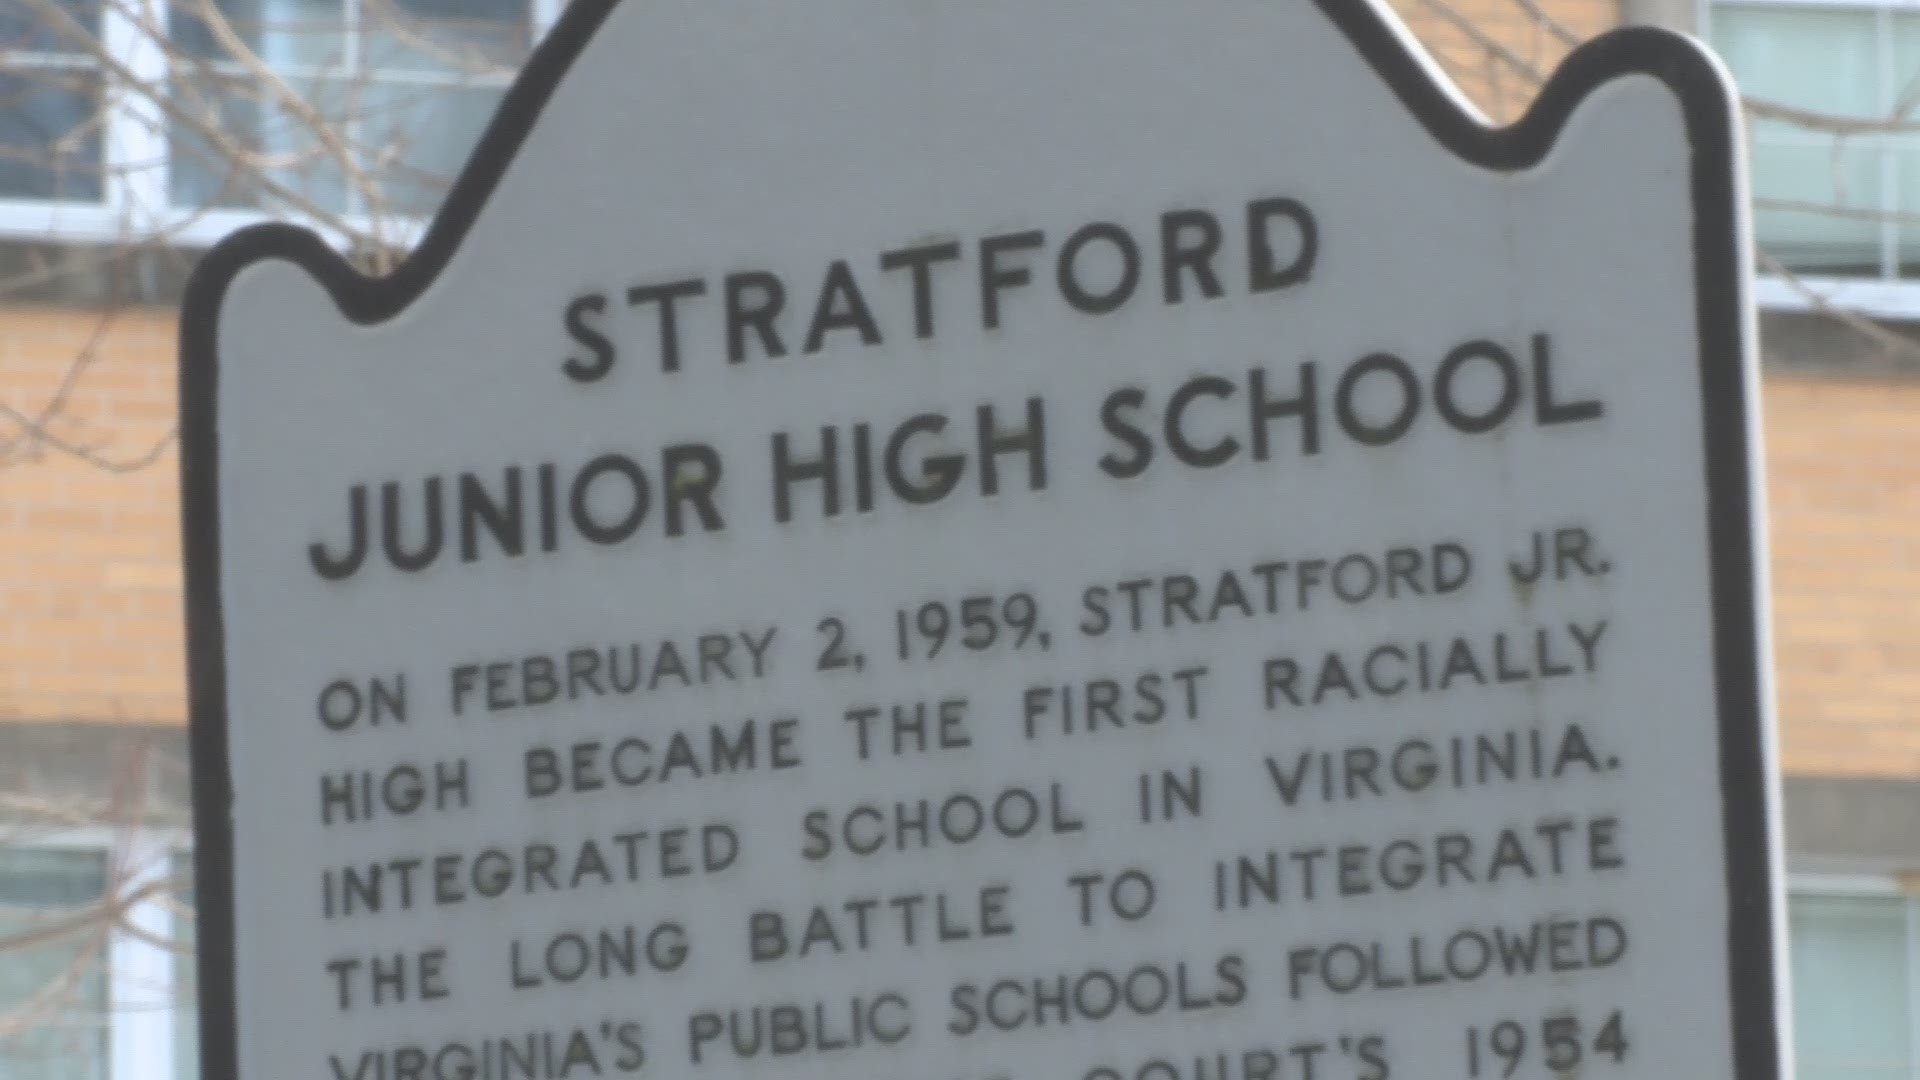 Arlington's school board voted to change name of the Stratford School to Dorothy Hamm, a local civil rights leader who fought for integration.